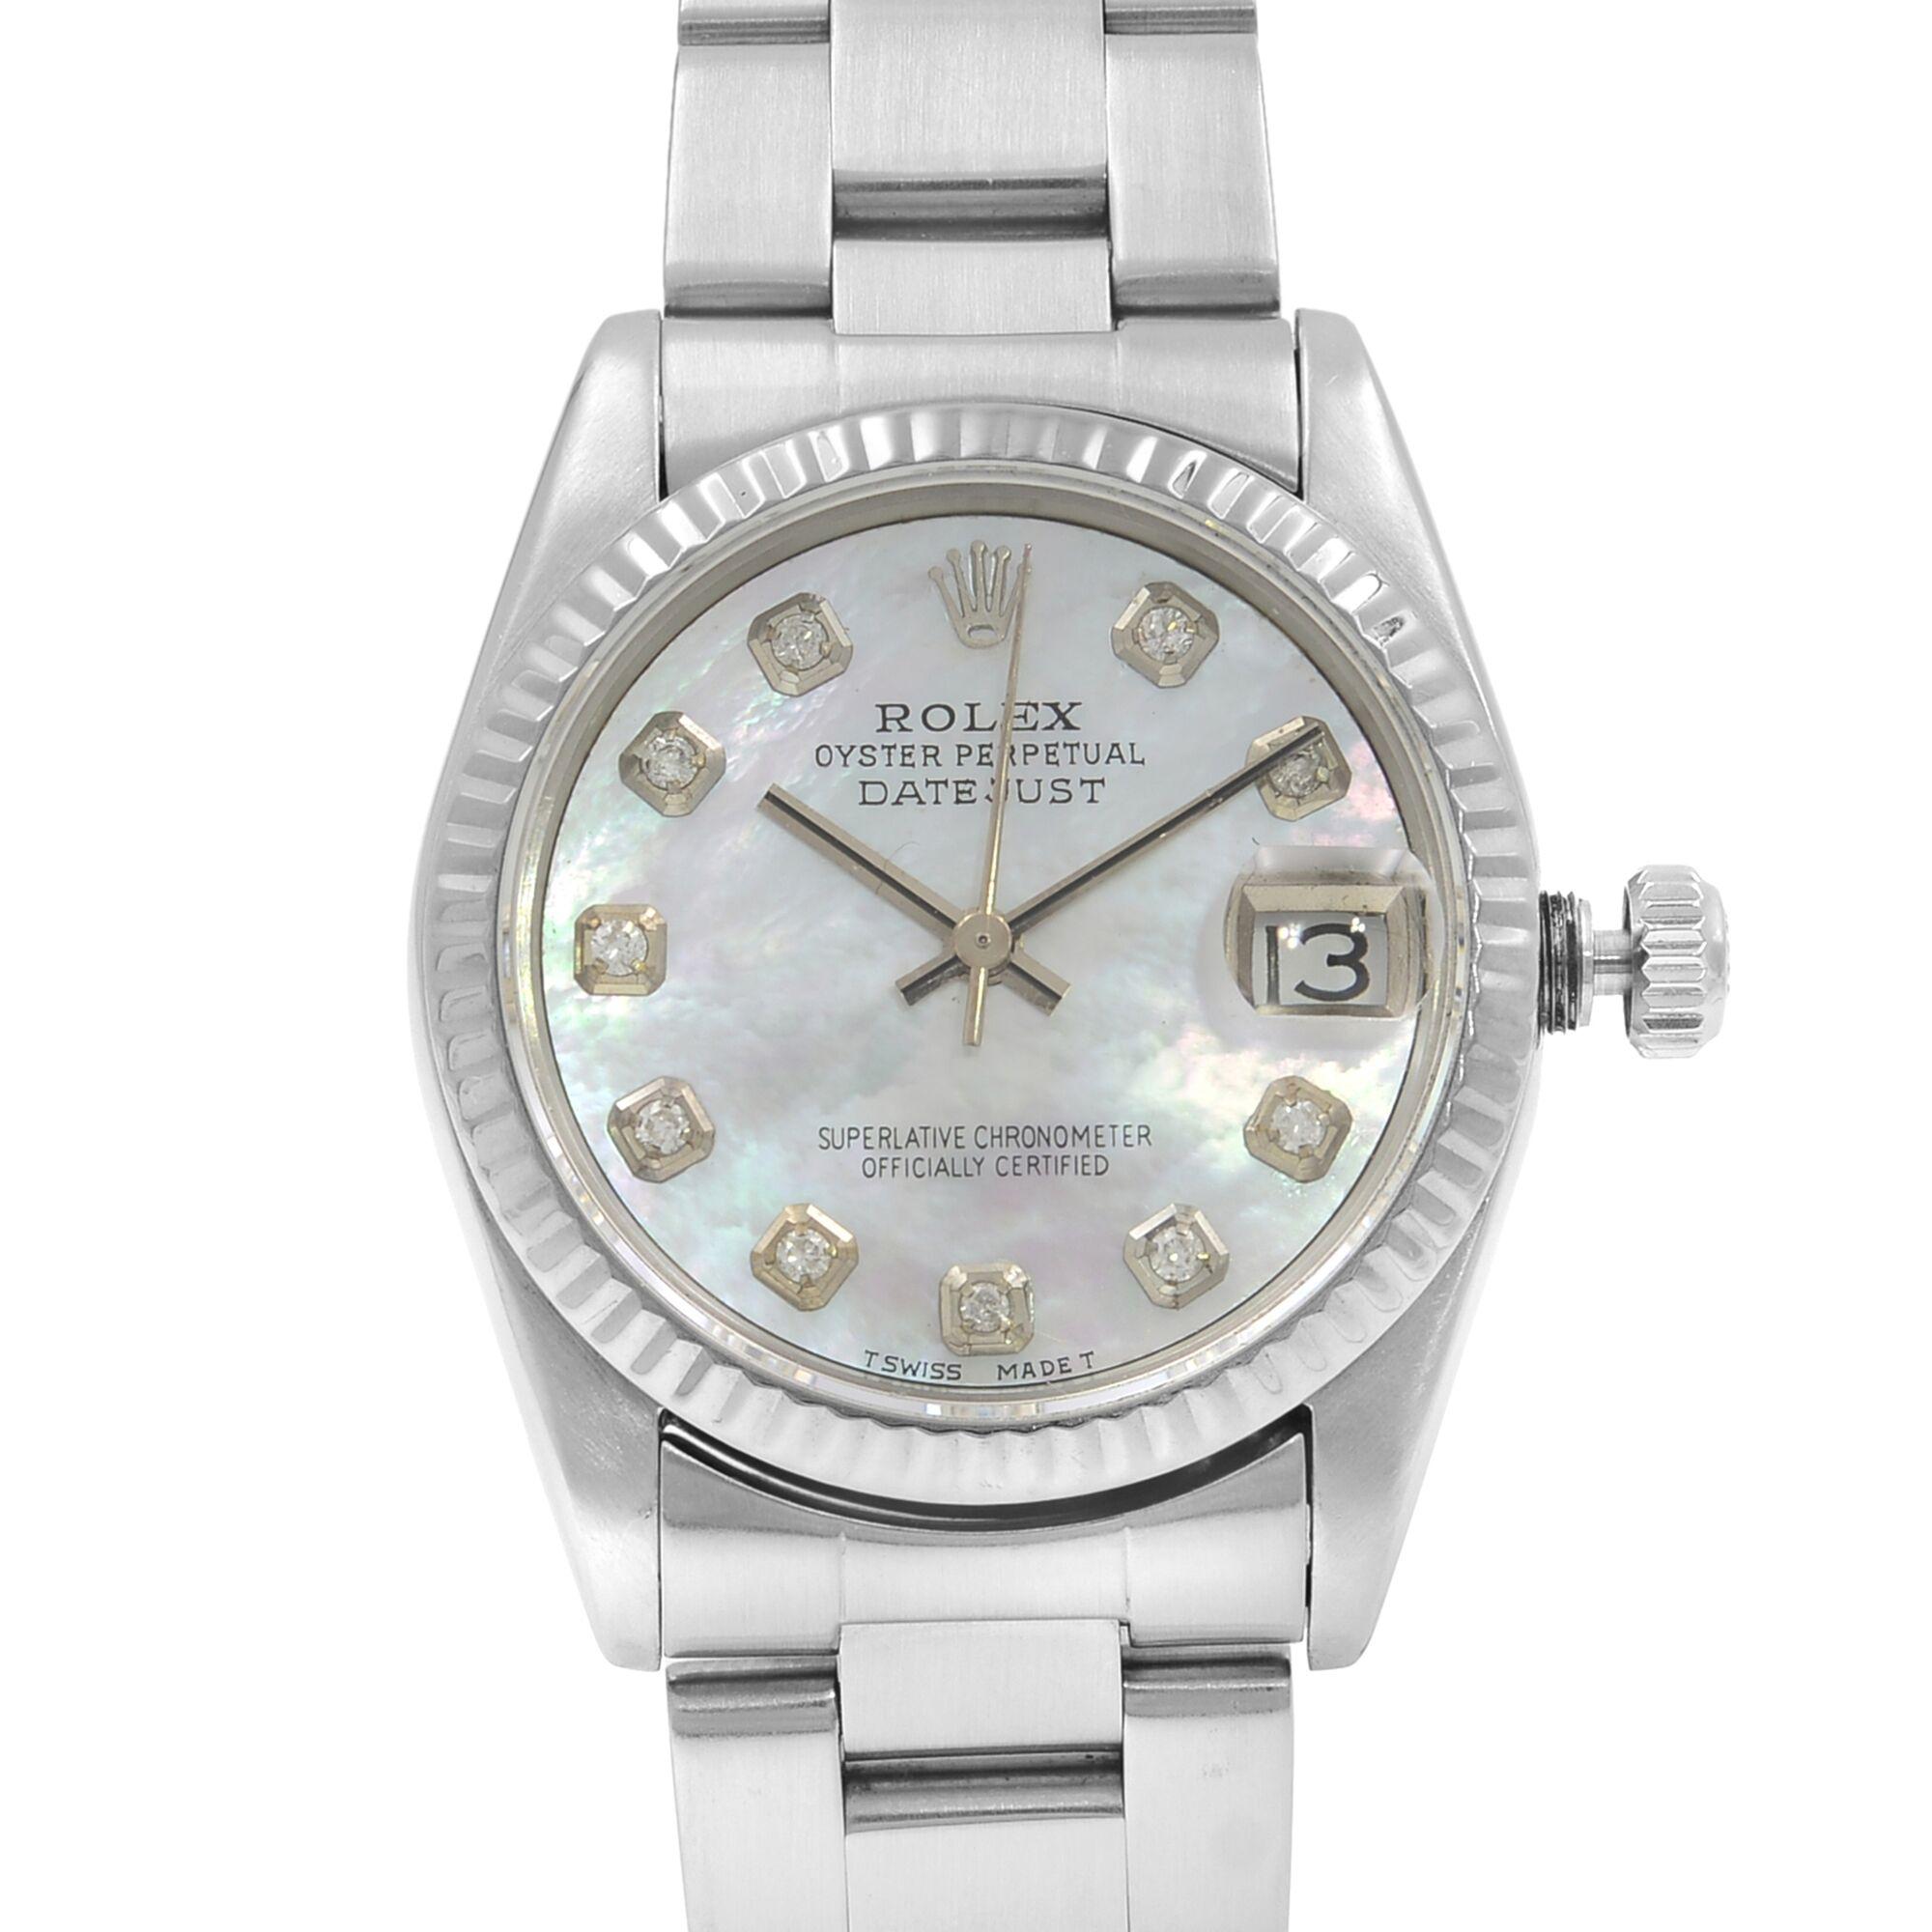 This pre-owned Rolex Datelste 68240 is a beautiful Ladies timepiece that is powered by an automatic movement which is cased in a stainless steel case. It has a round shape face, date, diamonds dial and has hand diamonds style markers. It is